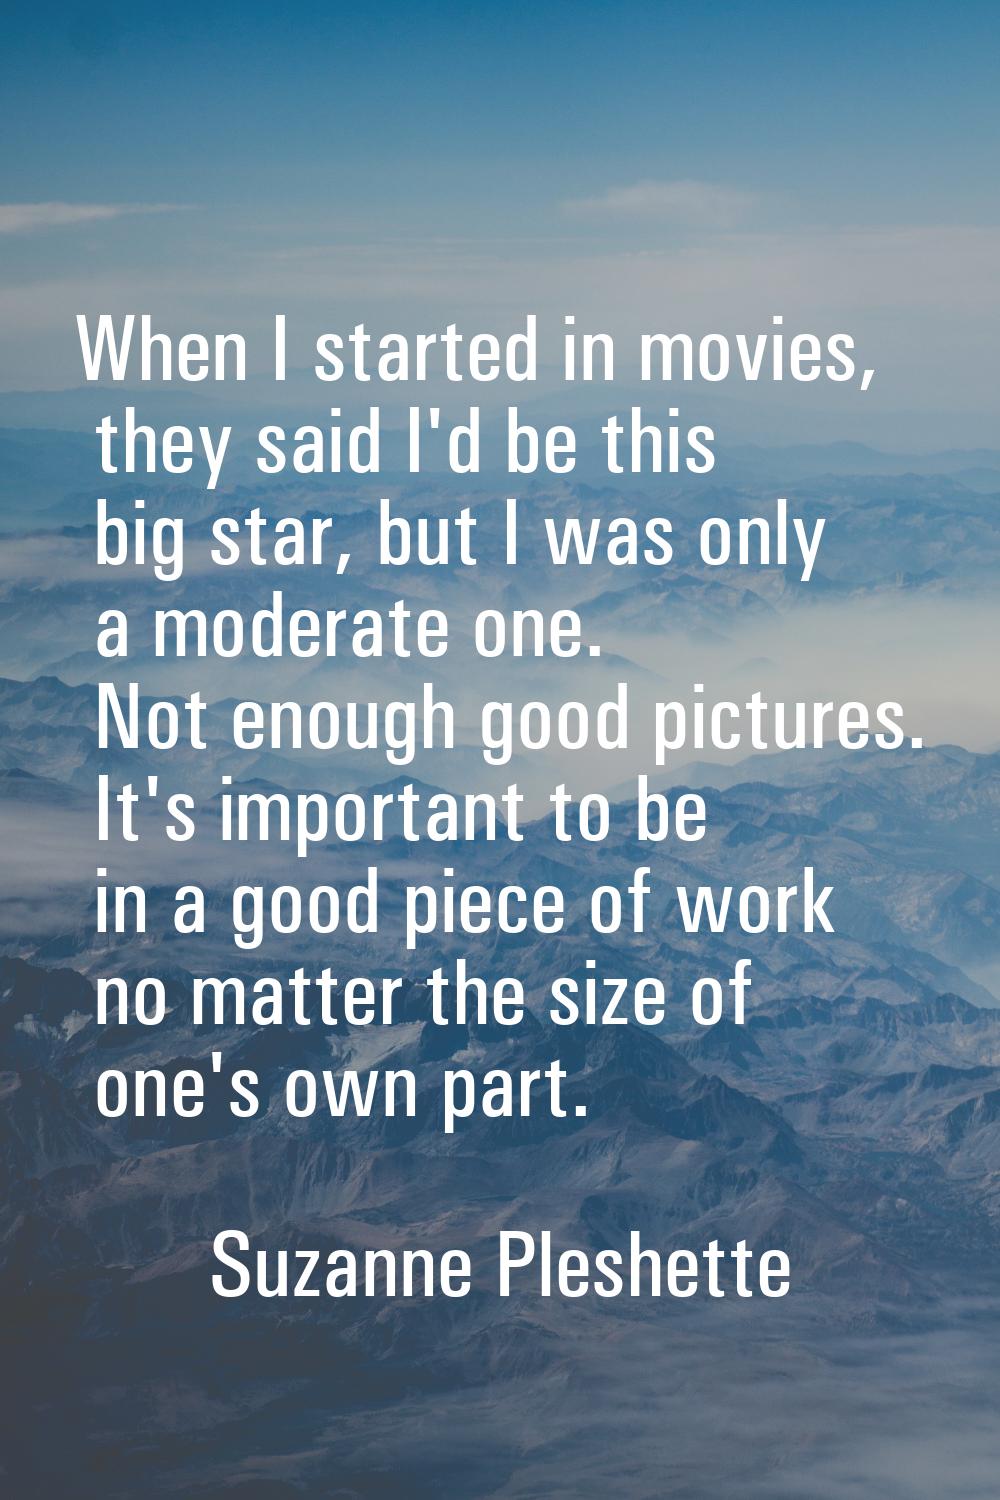 When I started in movies, they said I'd be this big star, but I was only a moderate one. Not enough